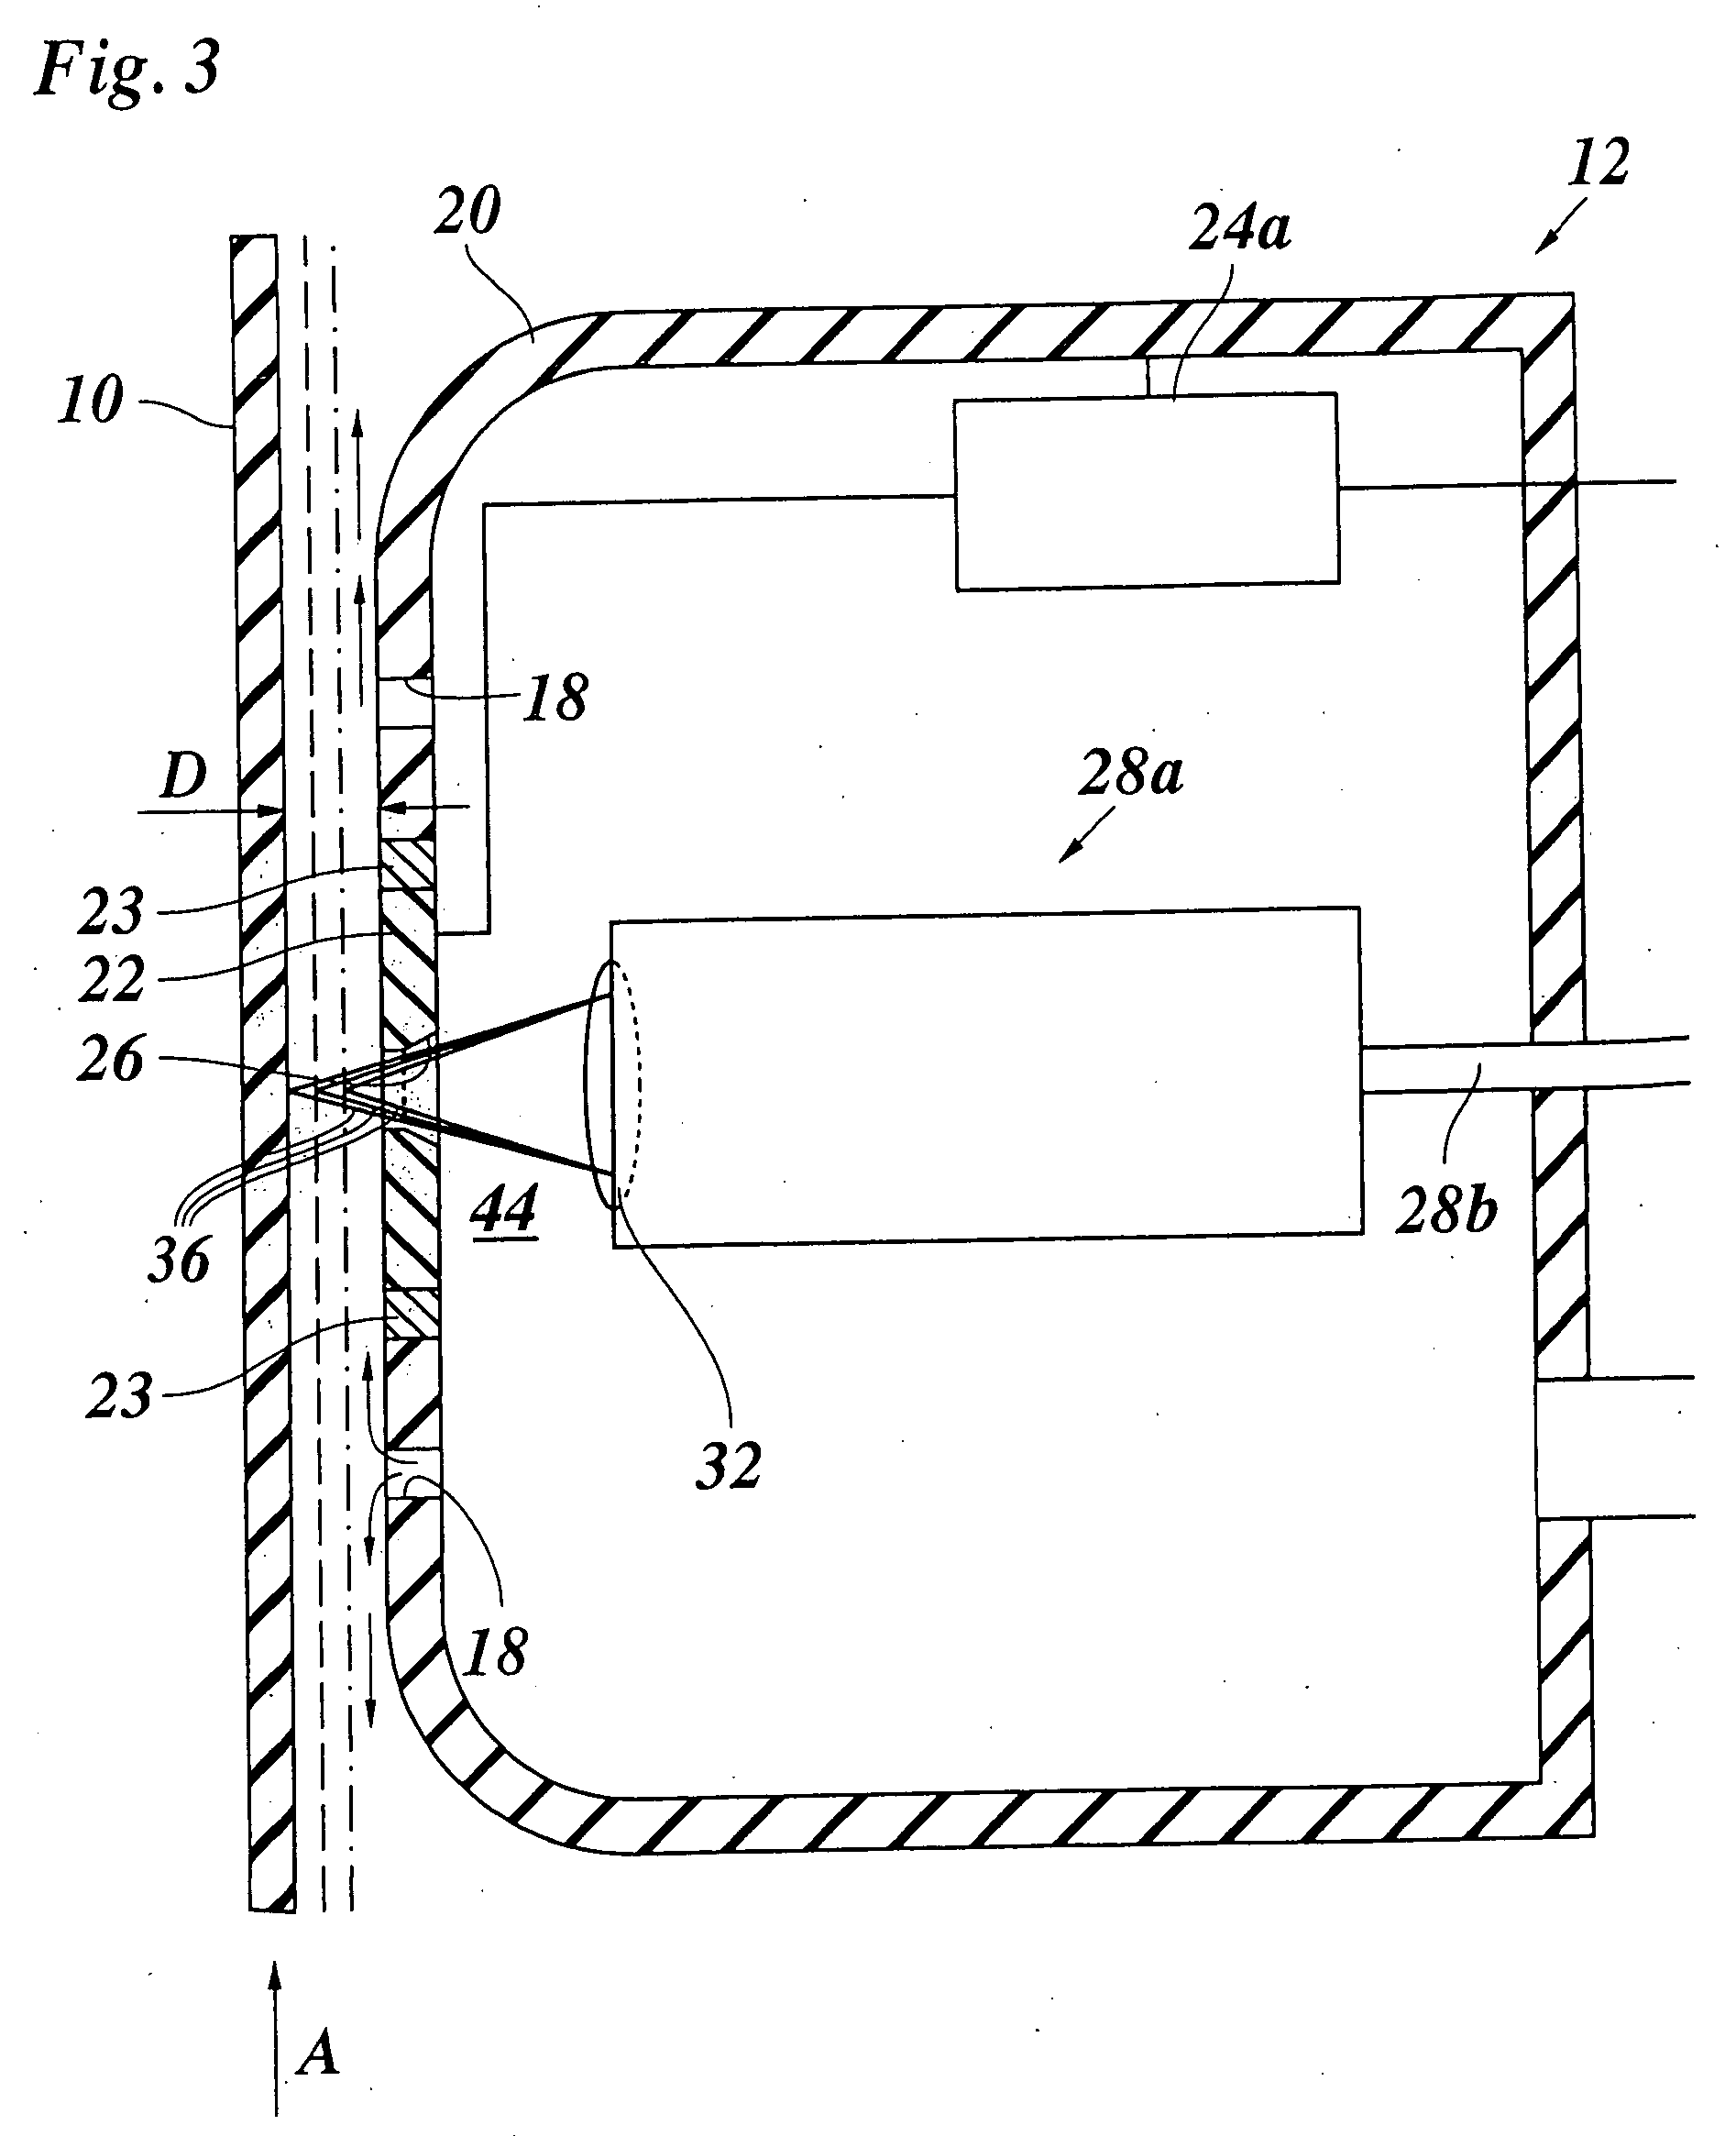 Apparatus and method for capacitive measurement of materials